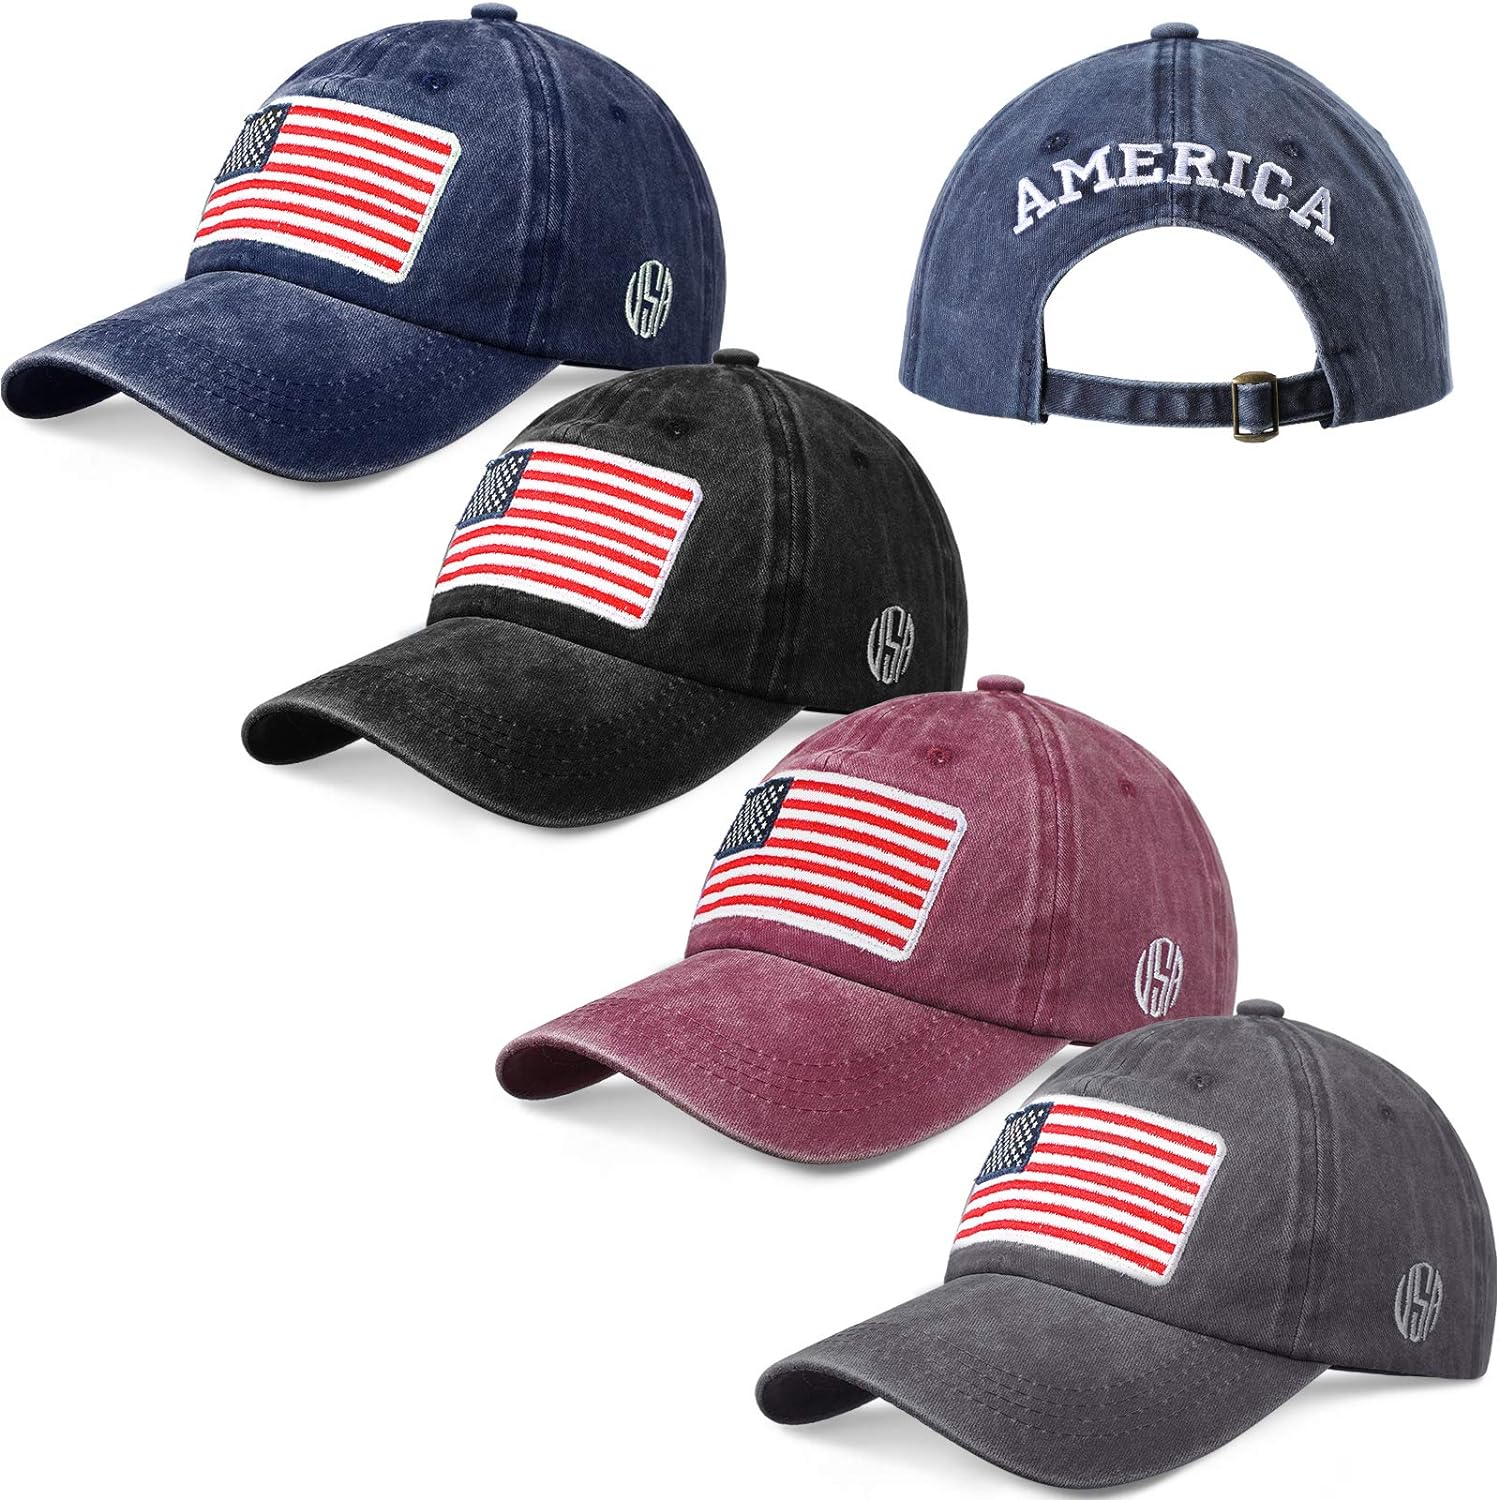 Geyoga 4 Pieces American Flag Baseball Caps USA Flag Tactical Cap Patriotic Flag Pride Caps Washed Distressed Cotton US Flag Hats for Men Women Teens